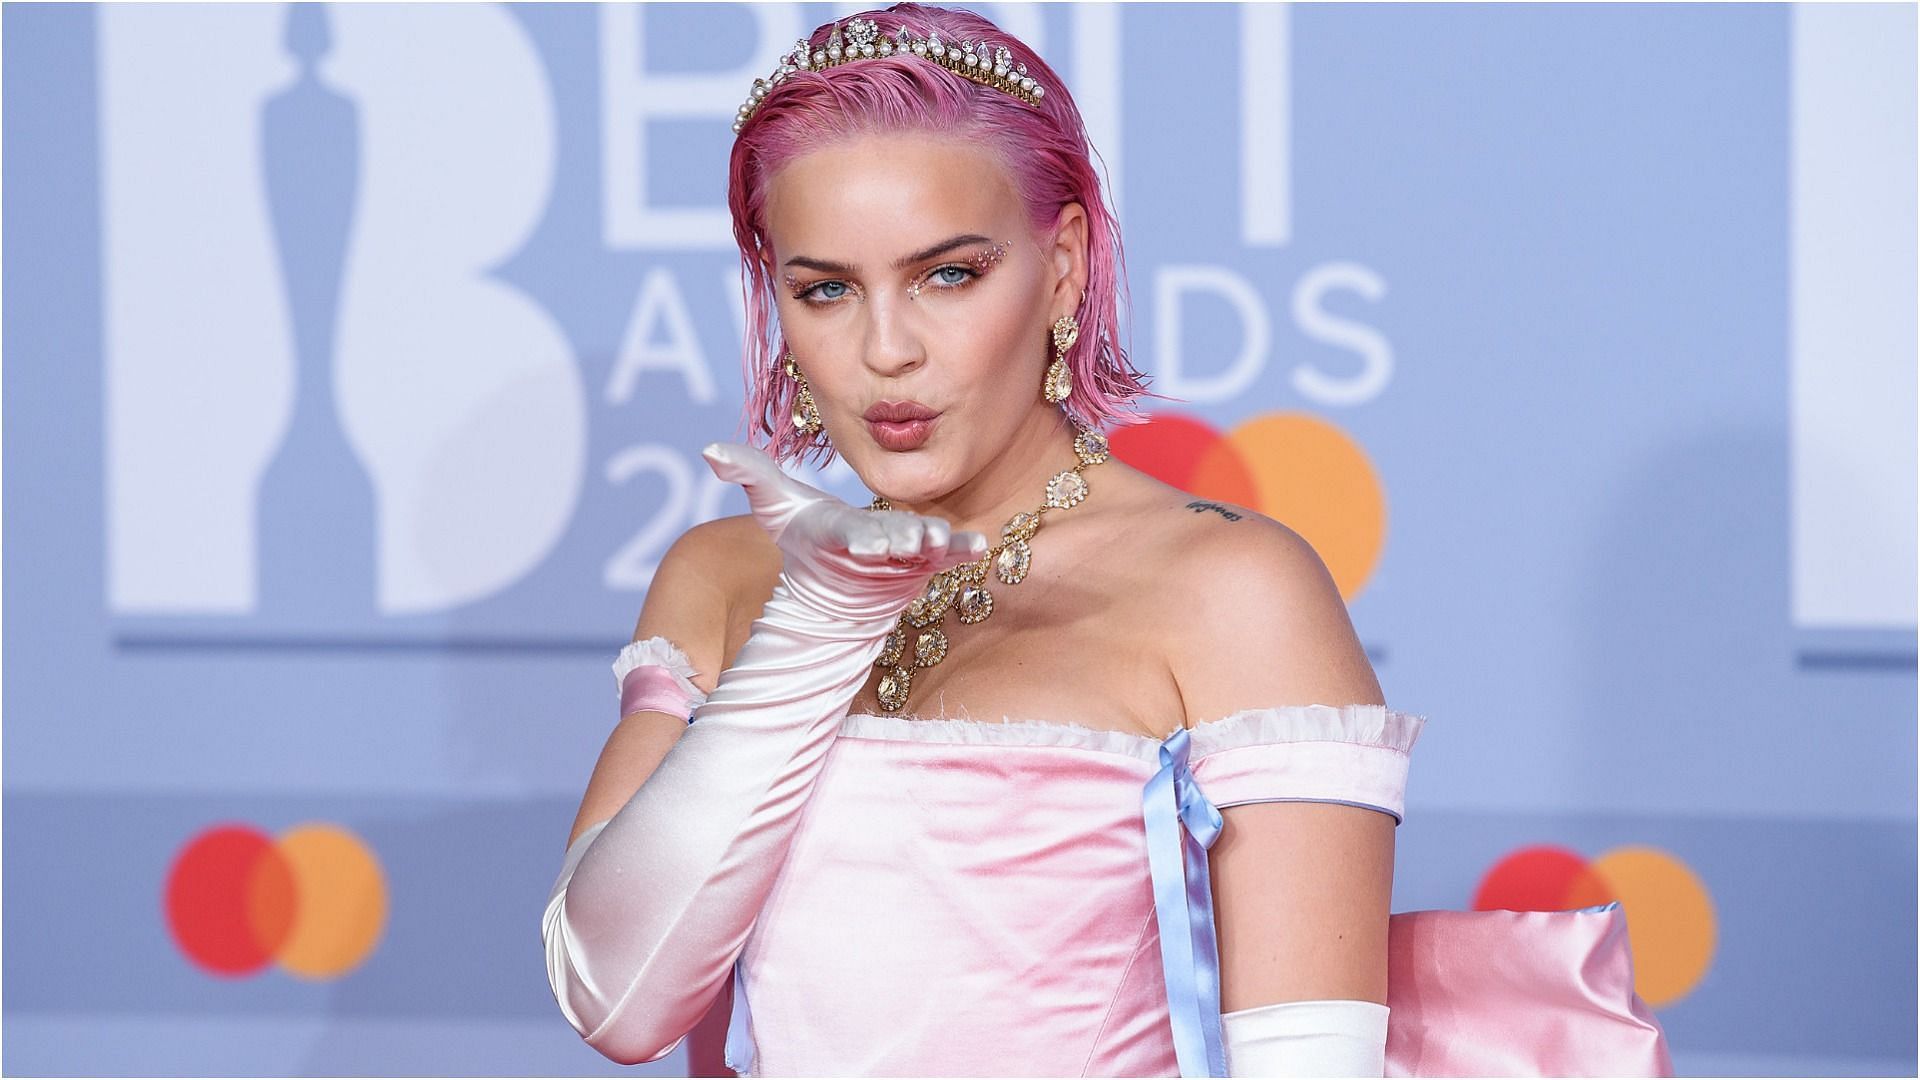 Anne-Marie accidentally stumbled on the stage while performing at the BRIT Awards on February 8 (Image via Getty Images/ Joe Maher)